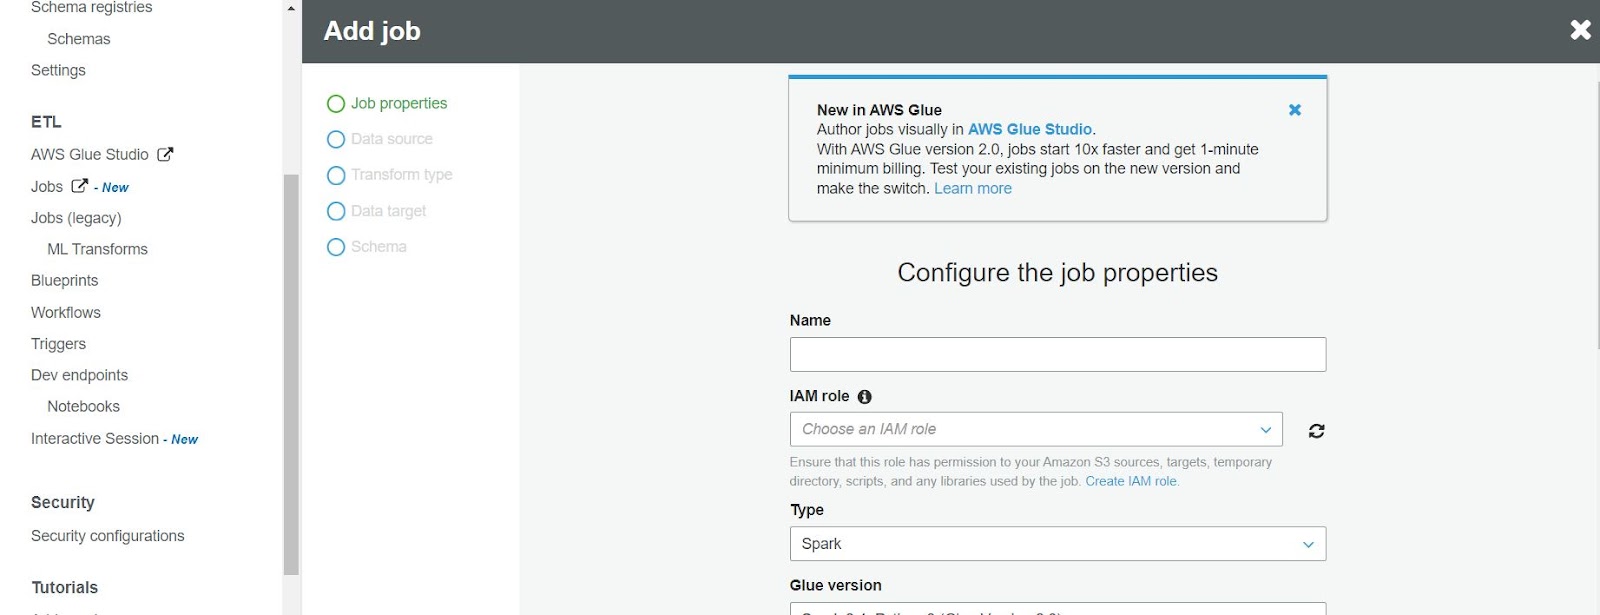 configure your job, data source, data target, and what transform with AWS Glue